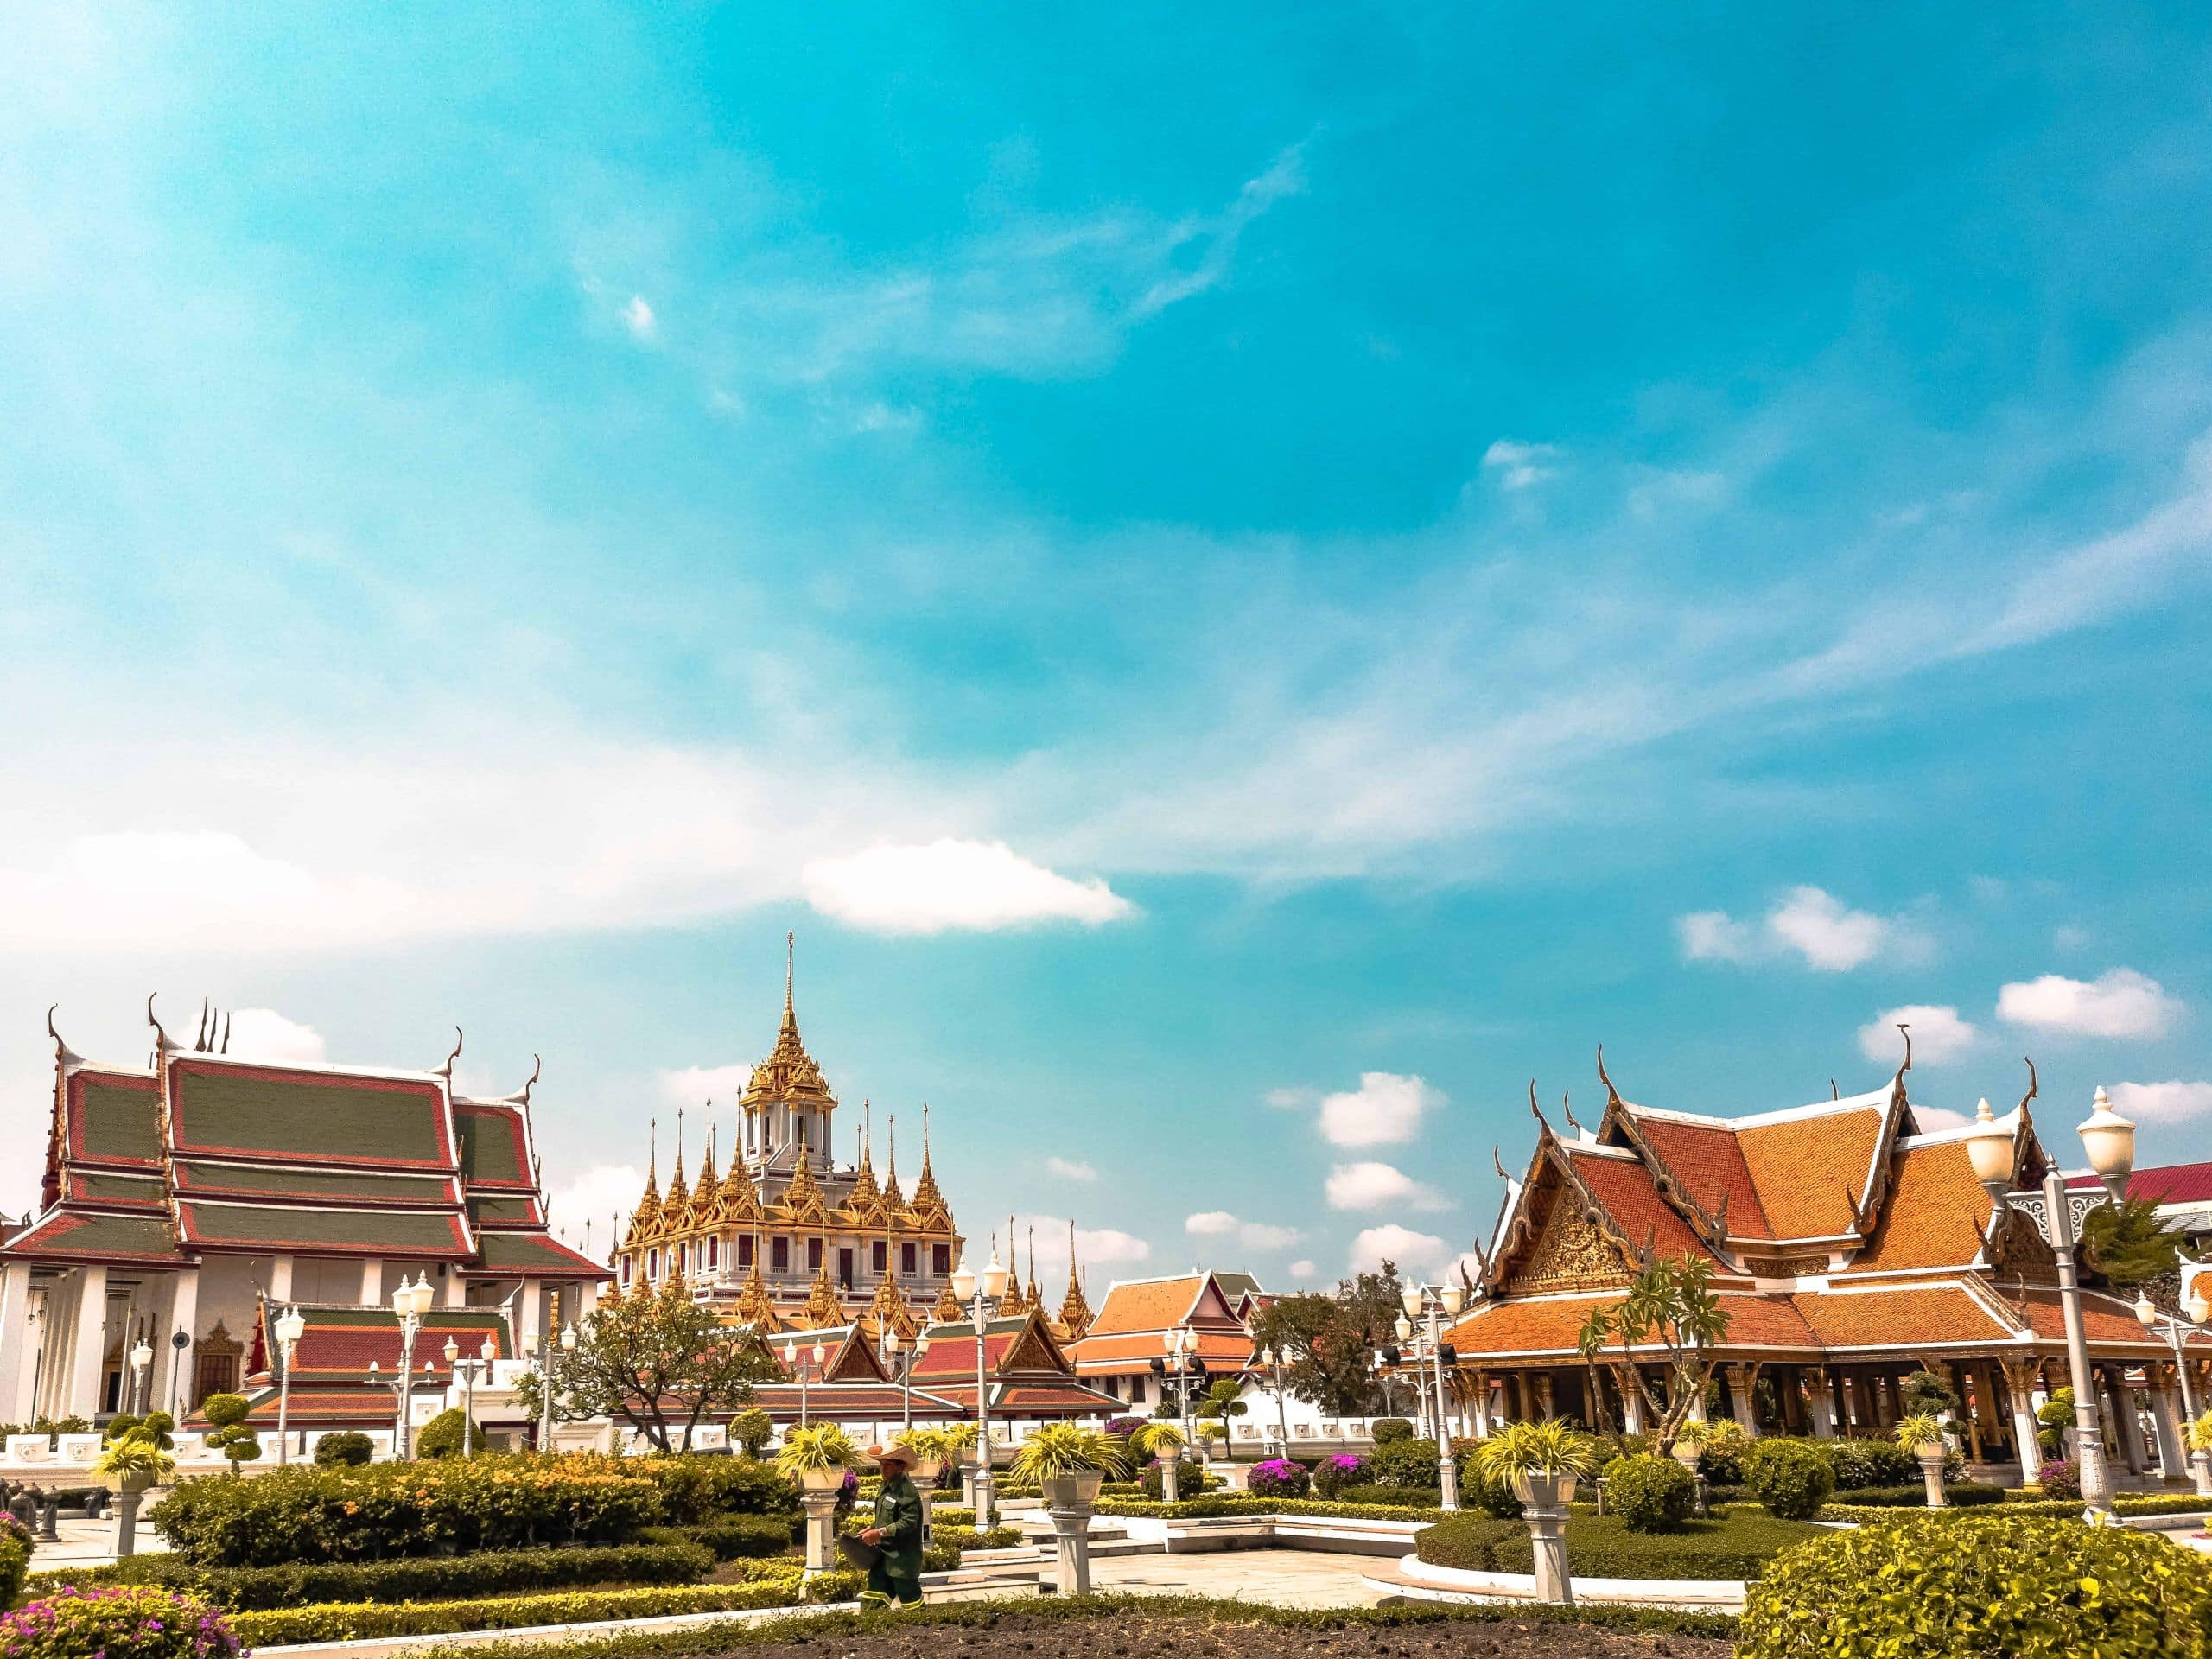 Fully Vaccinated travelers will no longer need to apply to enter Thailand under the Test & Go or Sandbox scheme